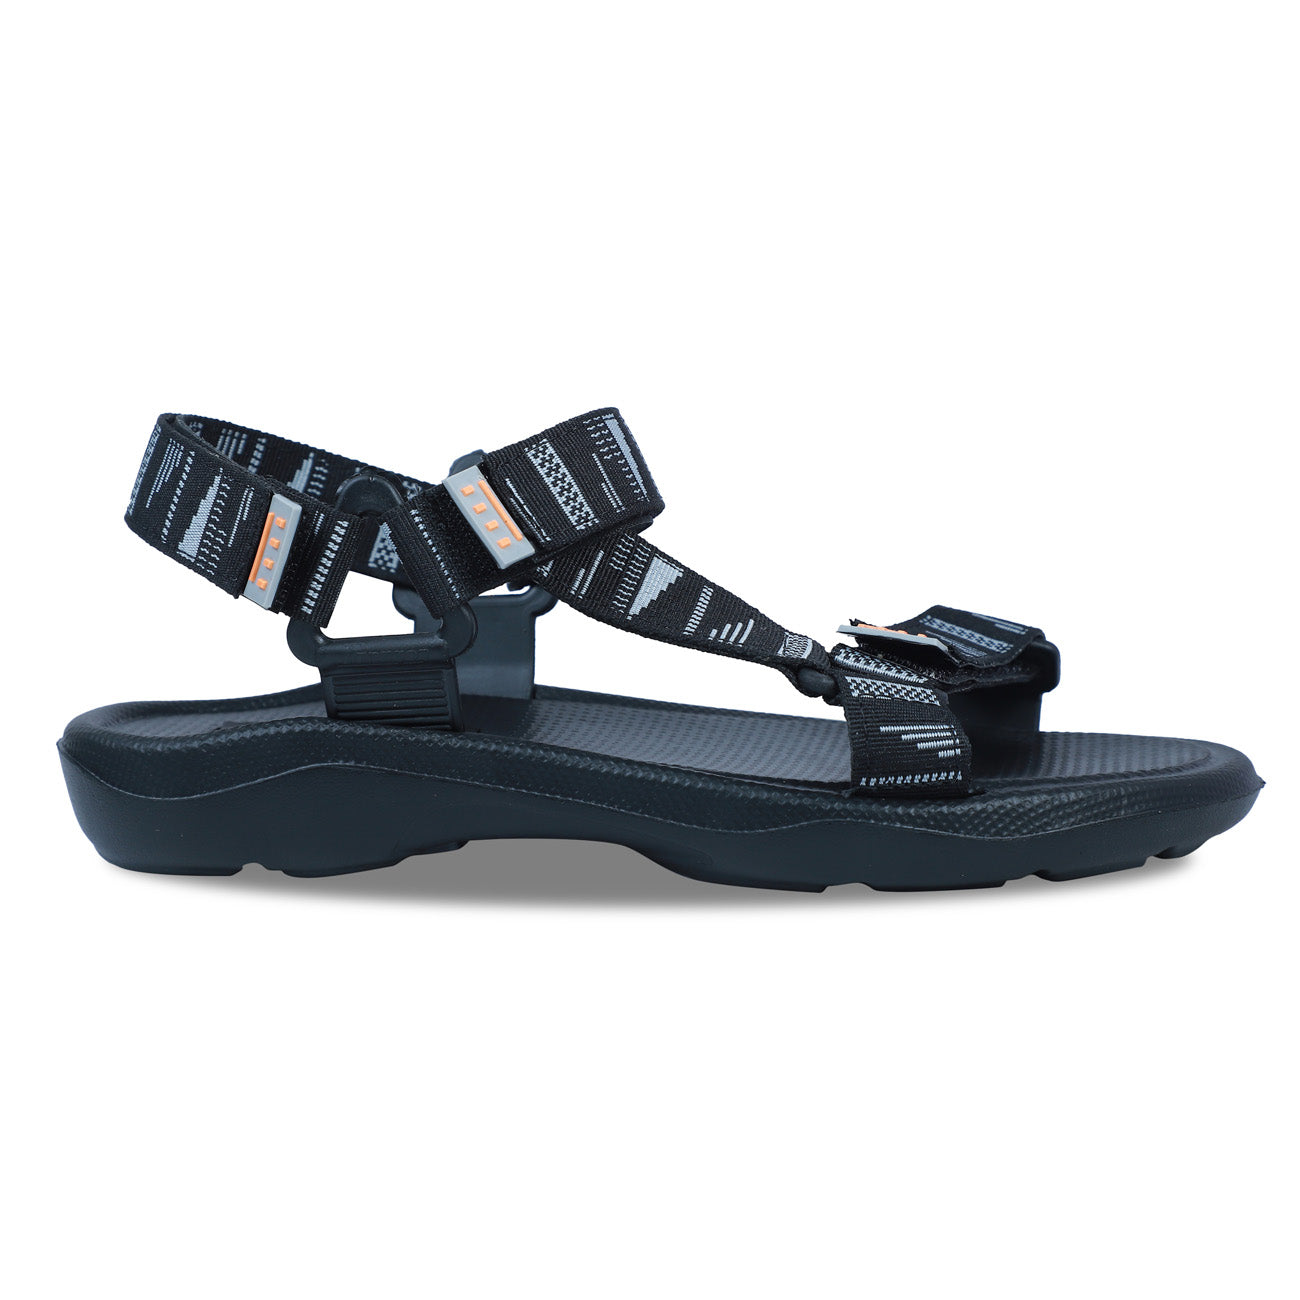 Paragon EVK1417G Mens Sandals Stylish Sandals | Comfortable Sporty Sandals | Daily Outdoor Use | Casual Wear | Cushioned Soles